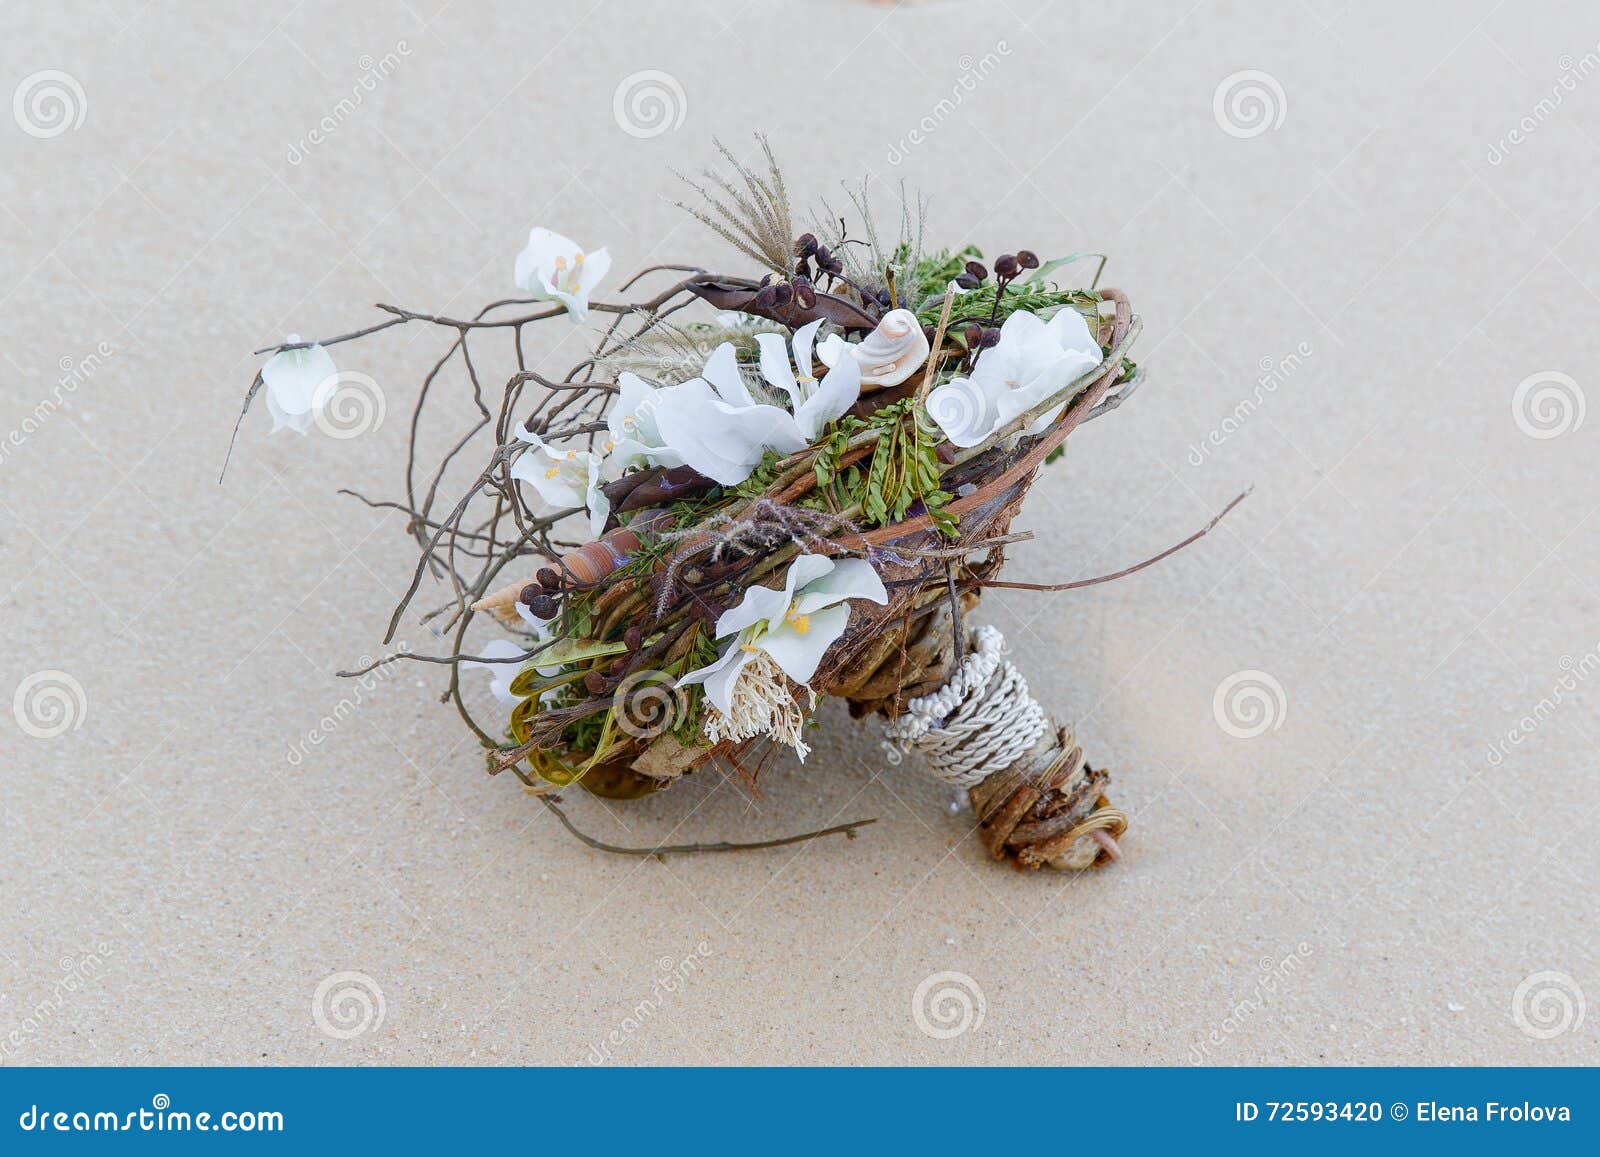 Wedding bridal bouquet made â€‹â€‹of shells and pearls and other natural materials on the sand. Wedding and honeymoon in the tropics.